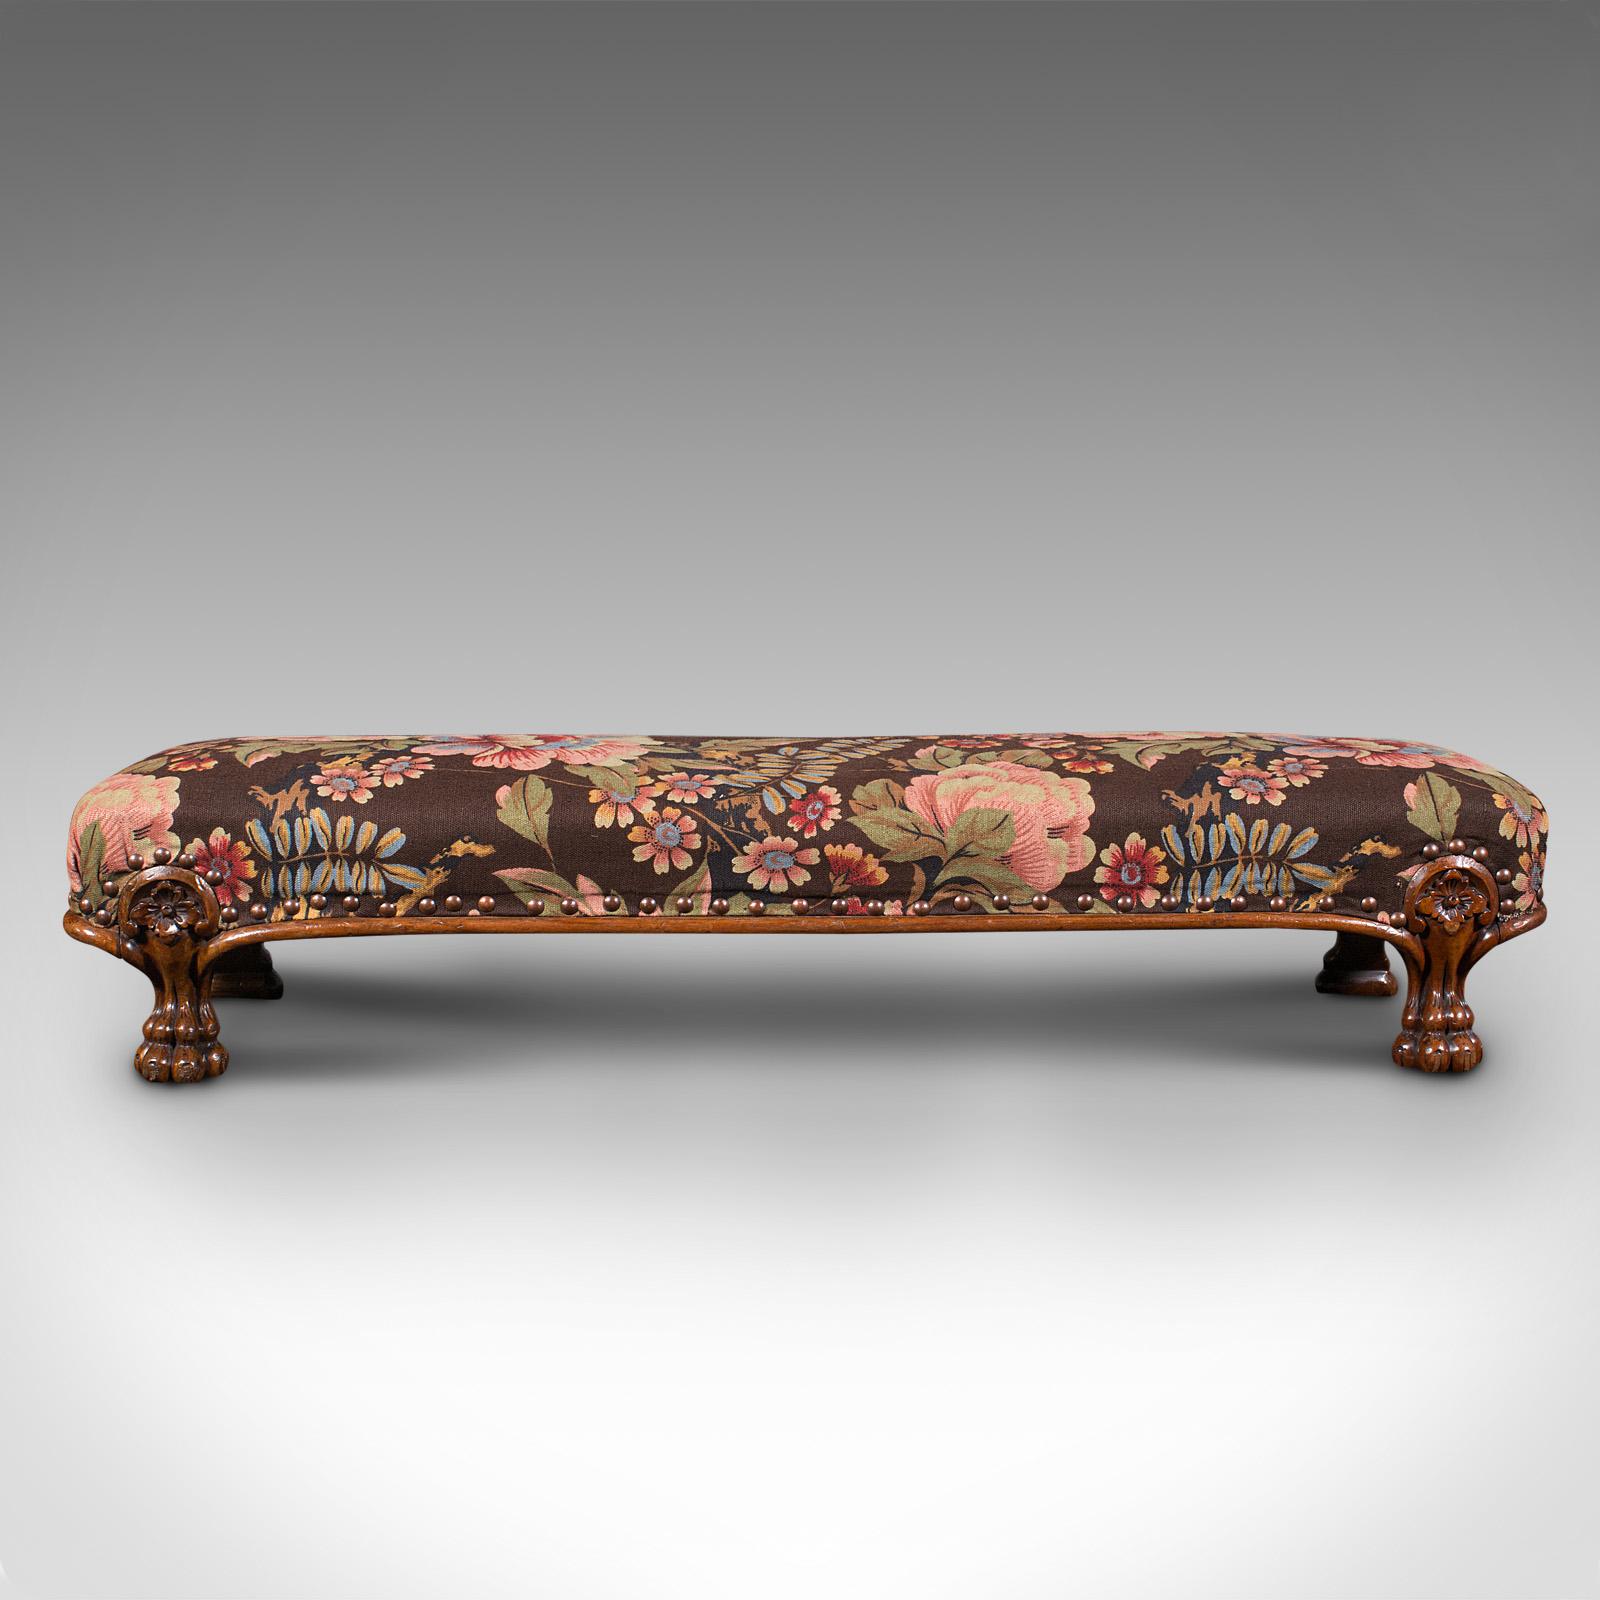 This is an antique fireside foot rest. An English, walnut kneeling or gout stool, dating to the mid Victorian period, circa 1860.

Vivacious upholstery and of a generous size
Displays a desirable aged patina throughout
Select walnut stocks show